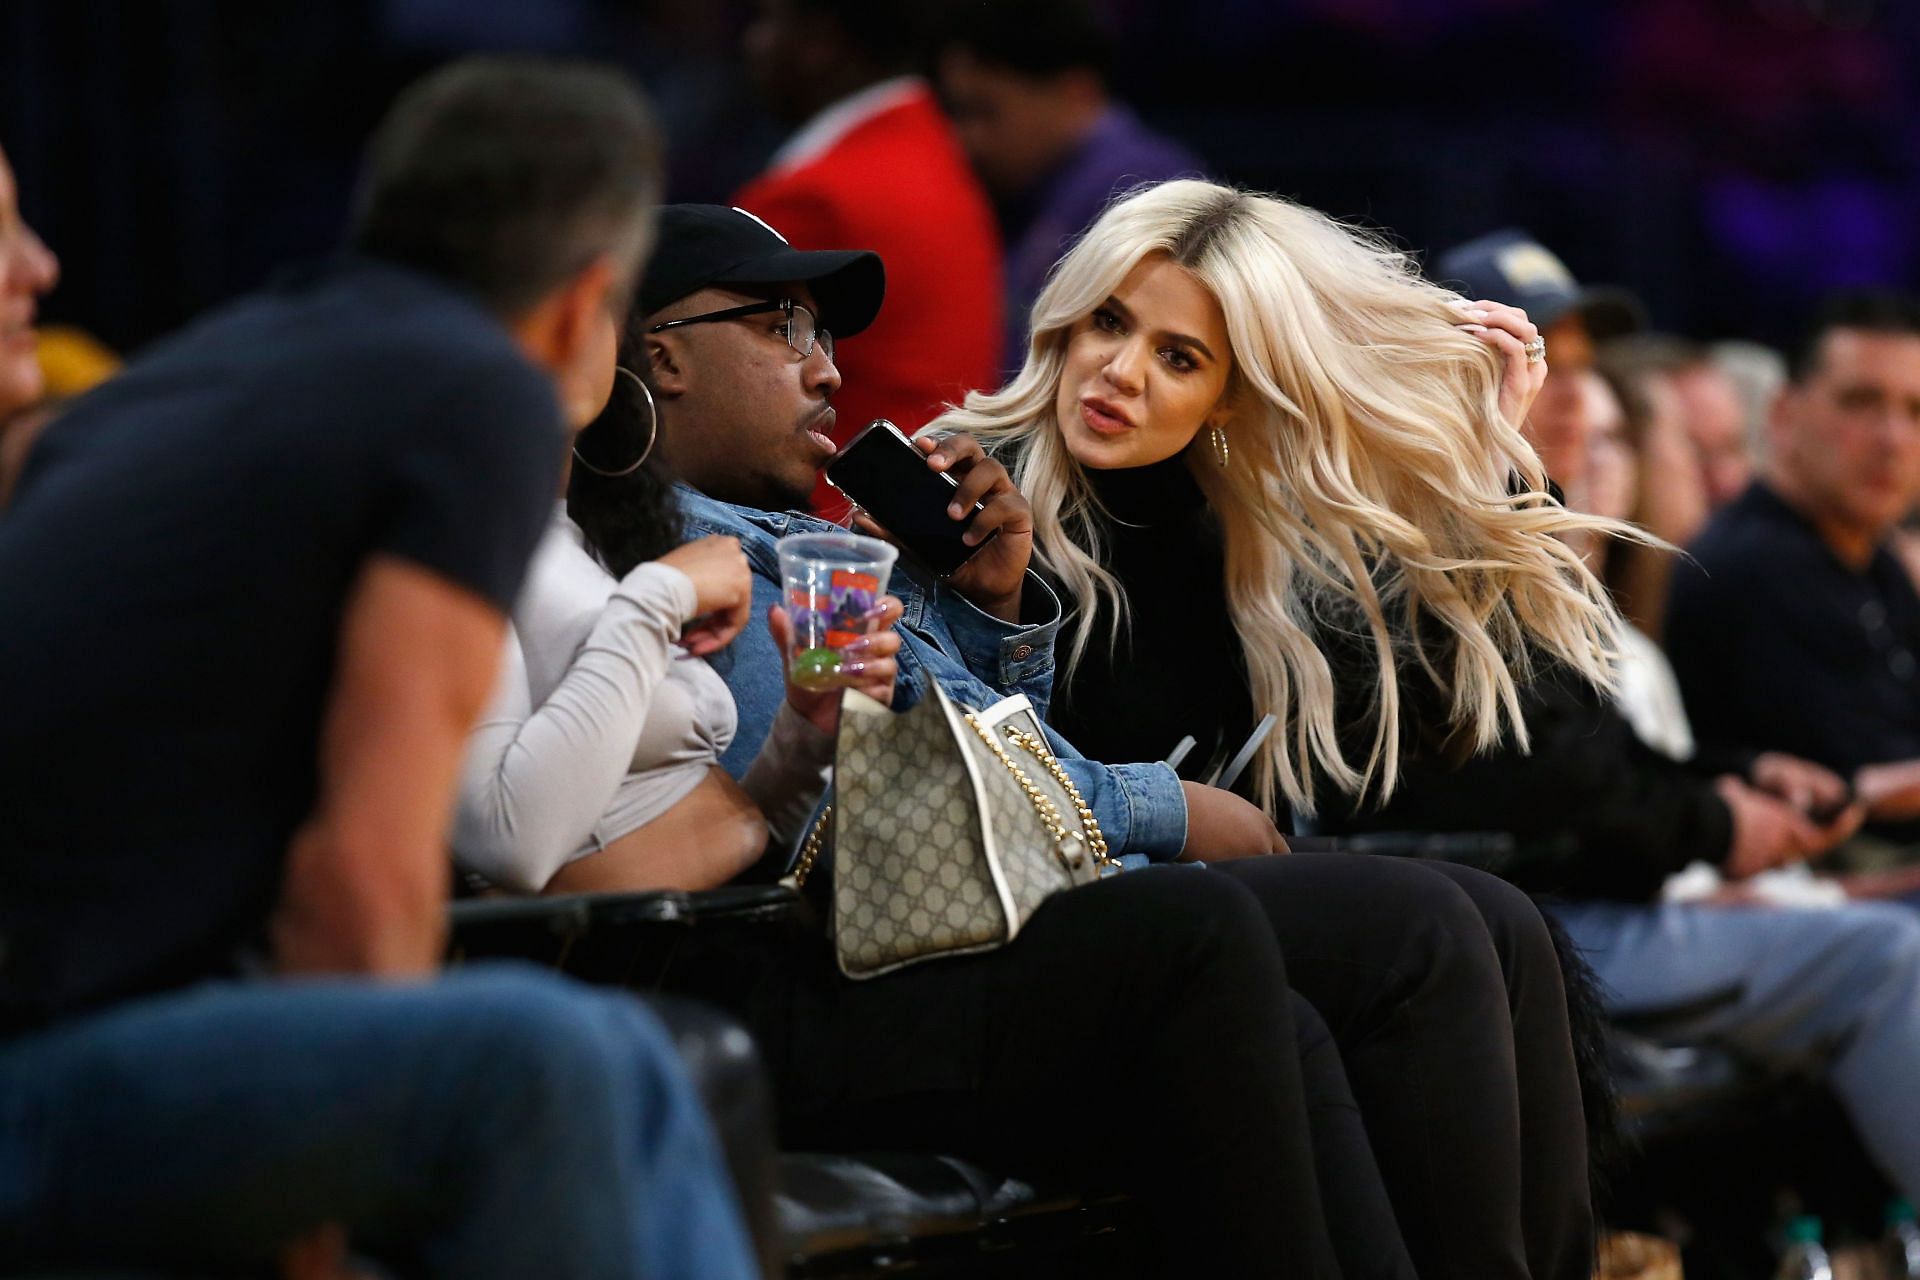 Khloe Kardashian was married to Odom for seven years (Image via Getty Images)